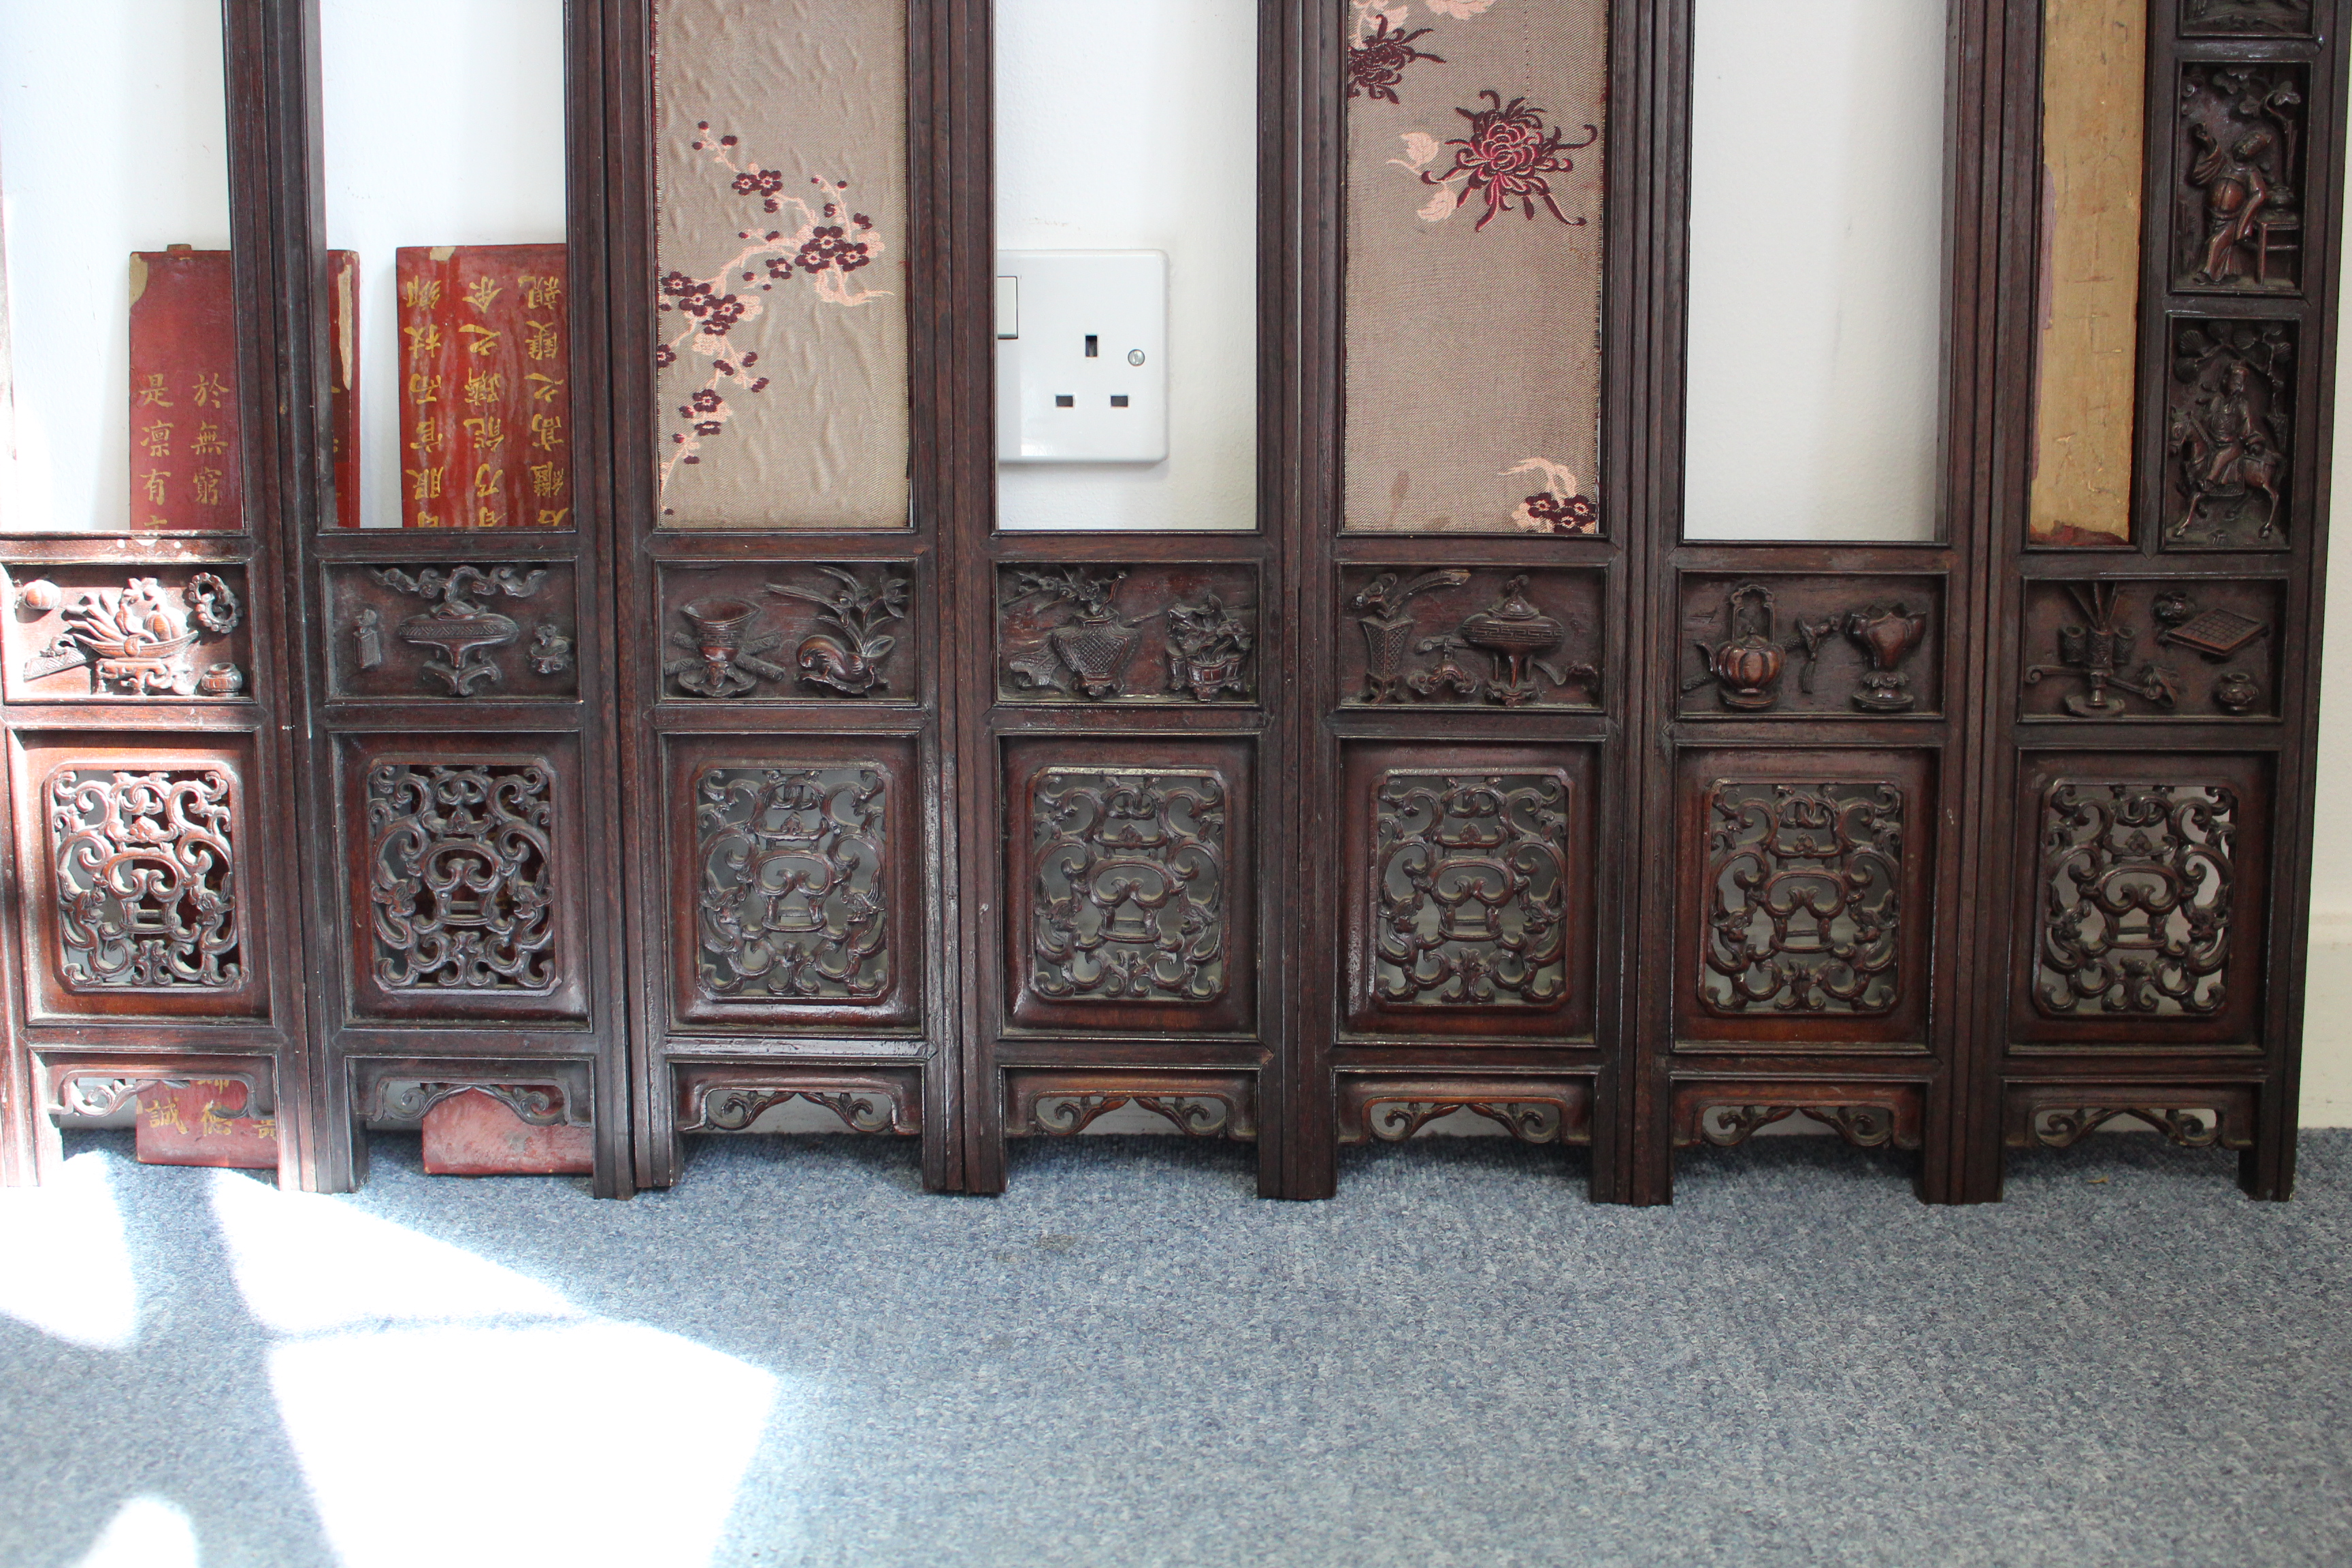 An early 20th century Chinese carved hardwood screen decorated with precious objects, figures, & - Image 5 of 6